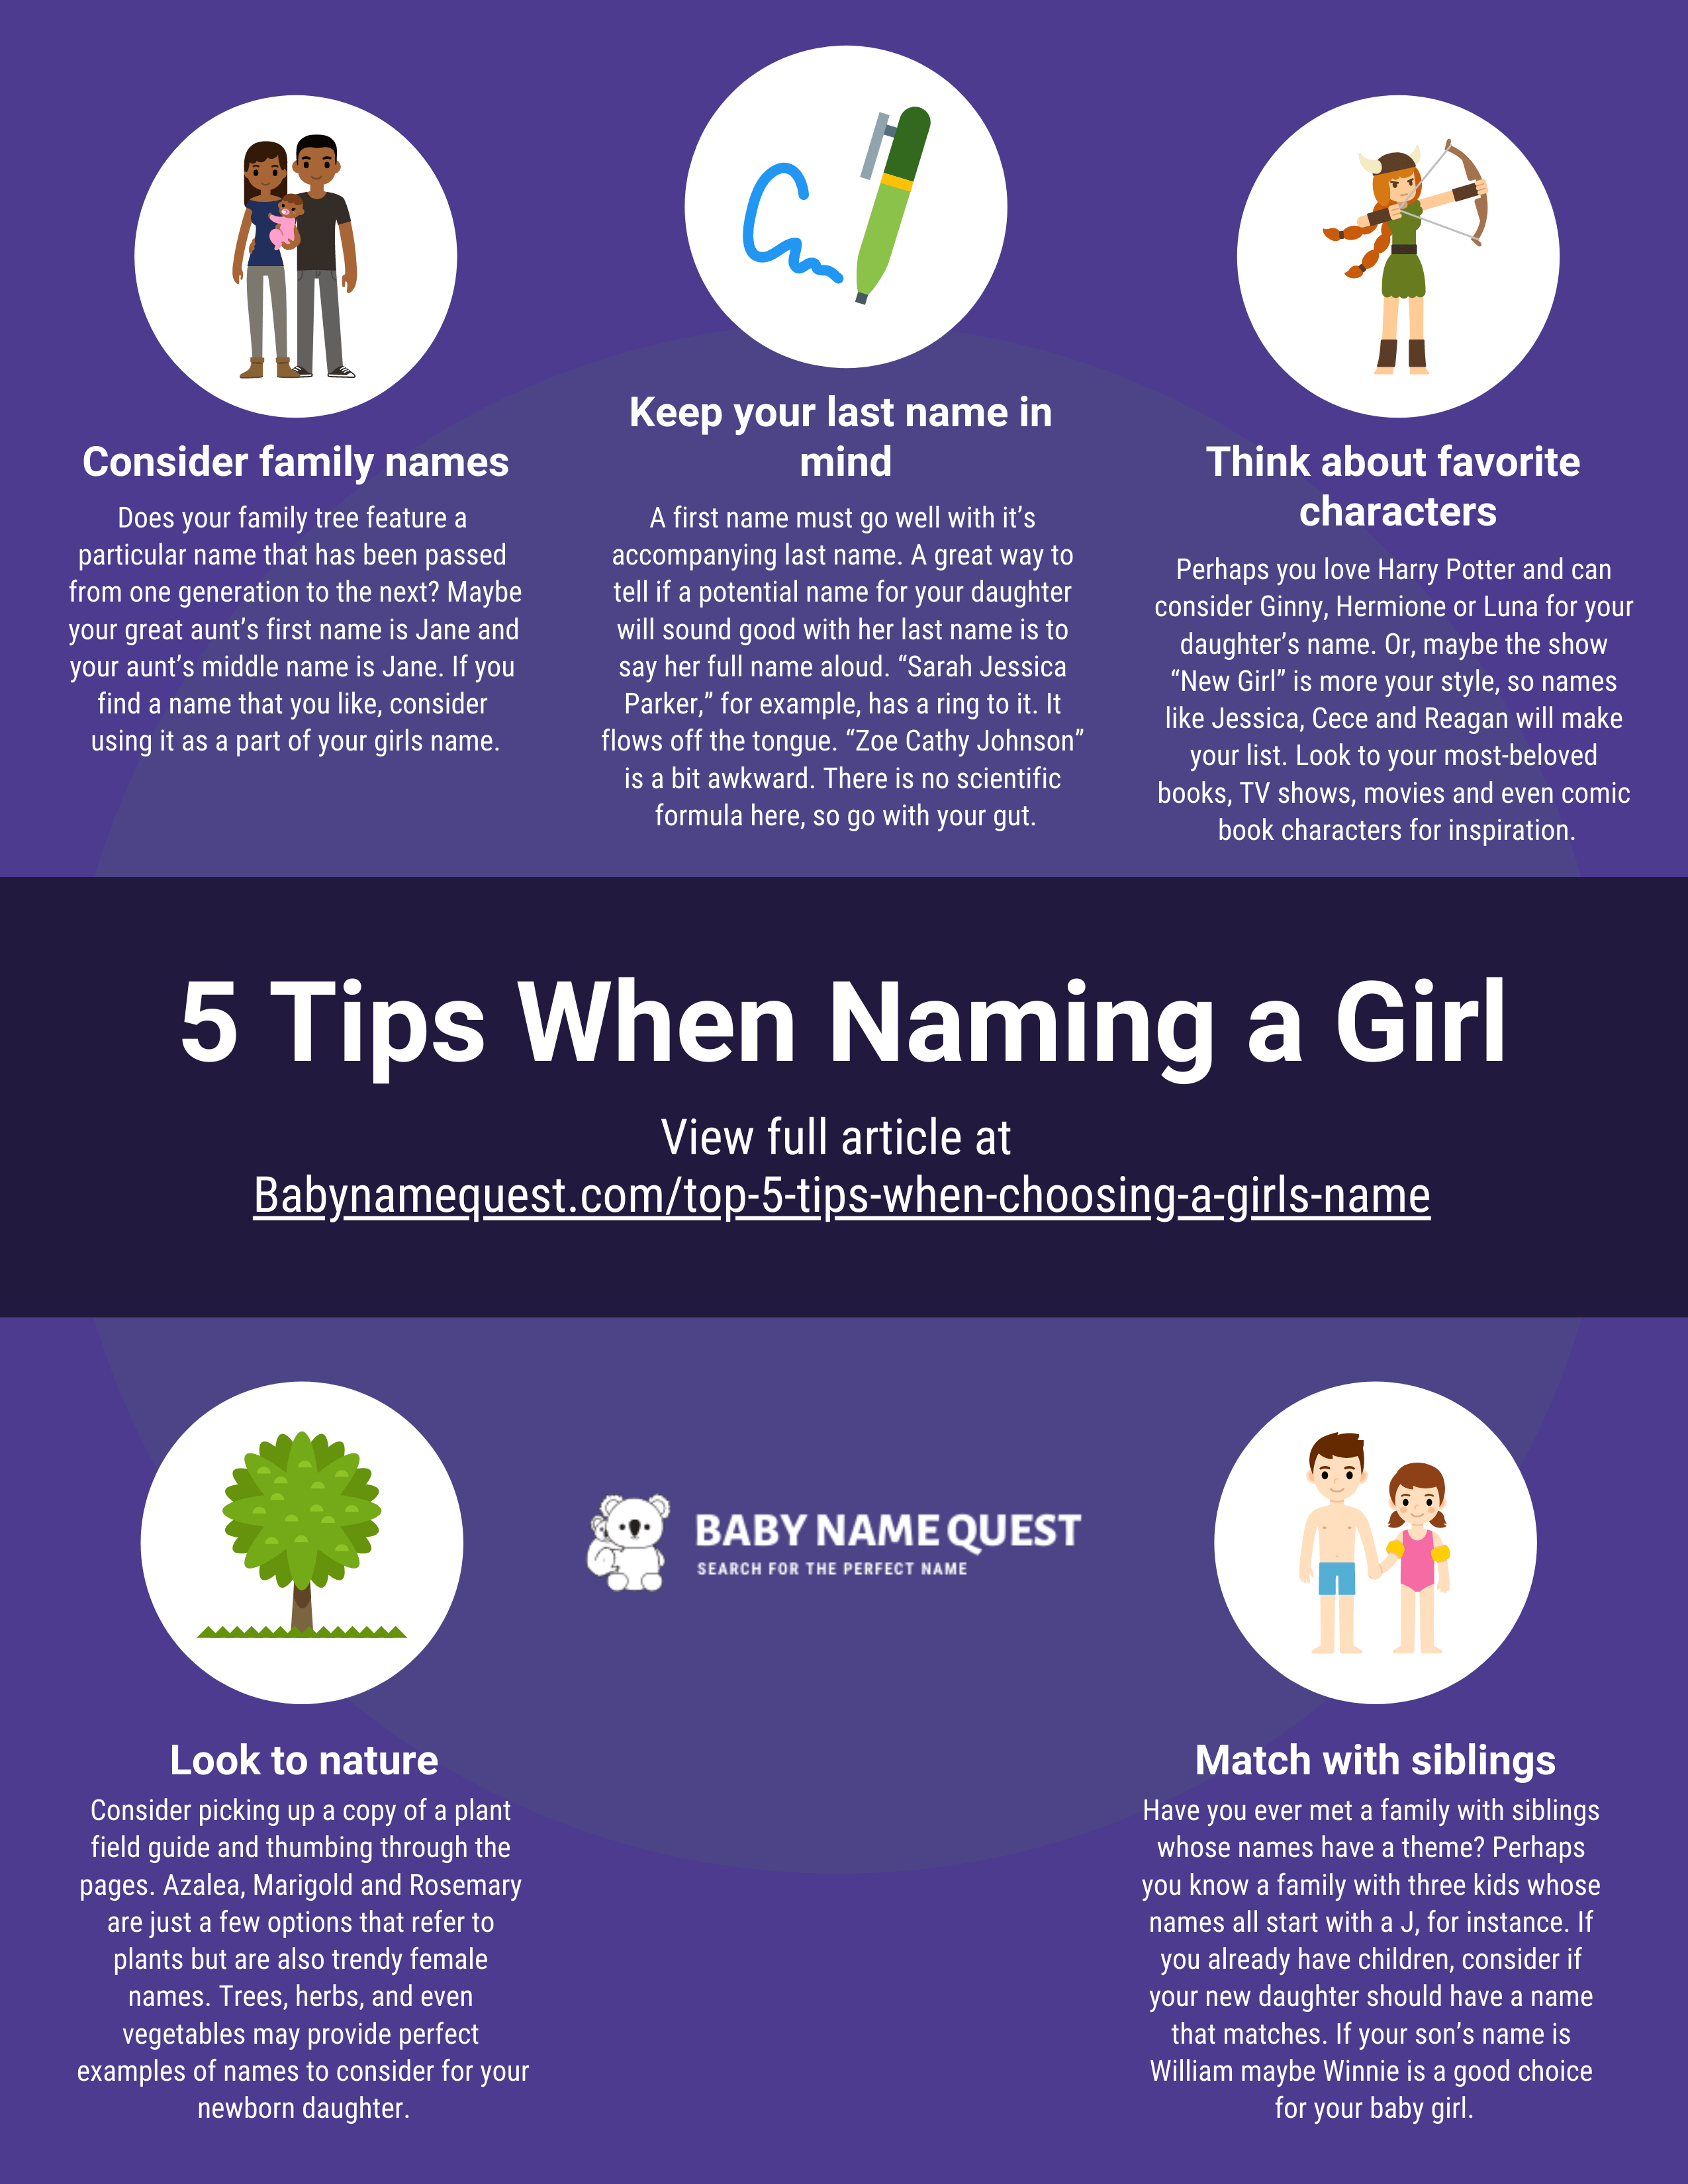 5 Tips When Naming A Girl Infographic